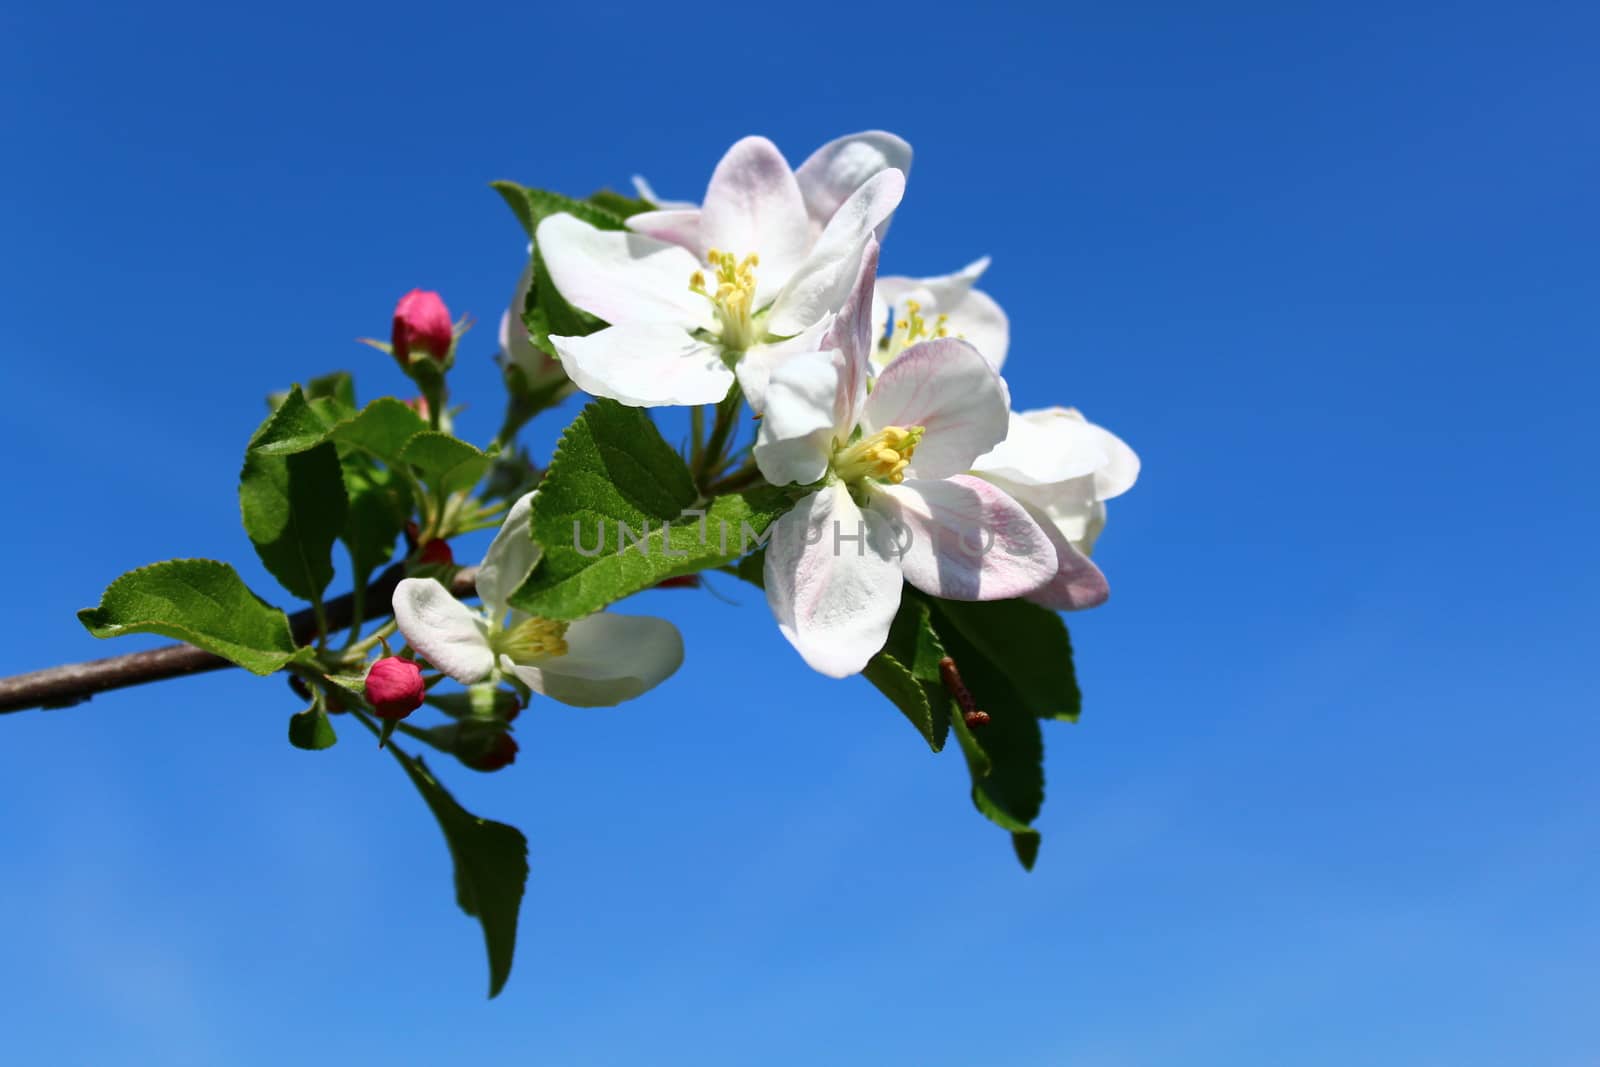 The picture shows a wonderful apple tree blossoms.